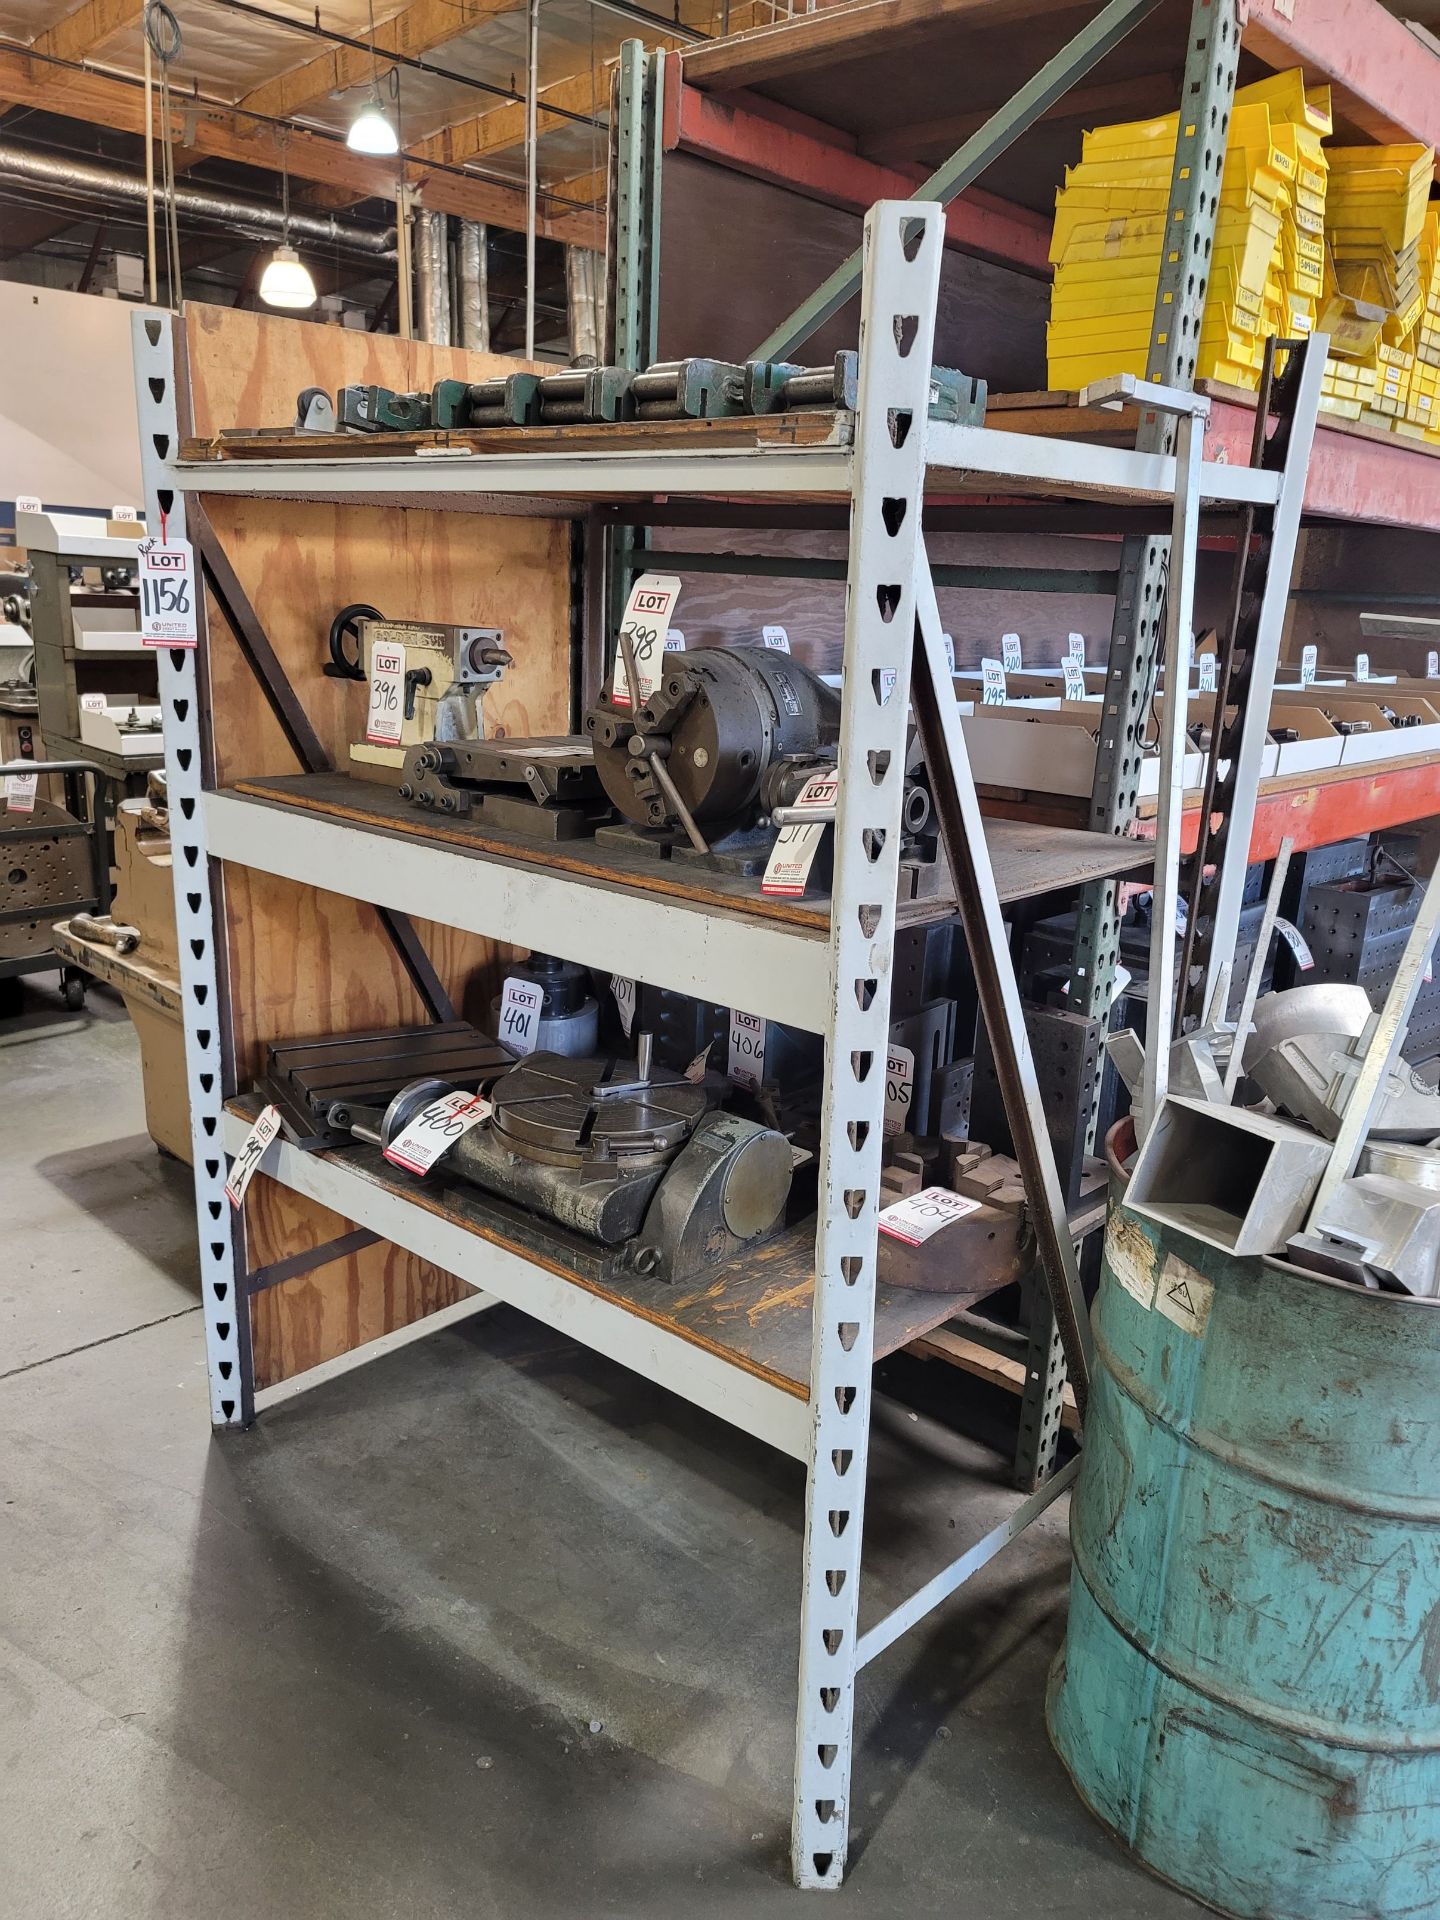 STEEL RACK W/ PLYWOOD SHELVES, 48" X 36" X 6' HT, CONTENTS NOT INCLUDED, (DELAYED PICKUP UNTIL